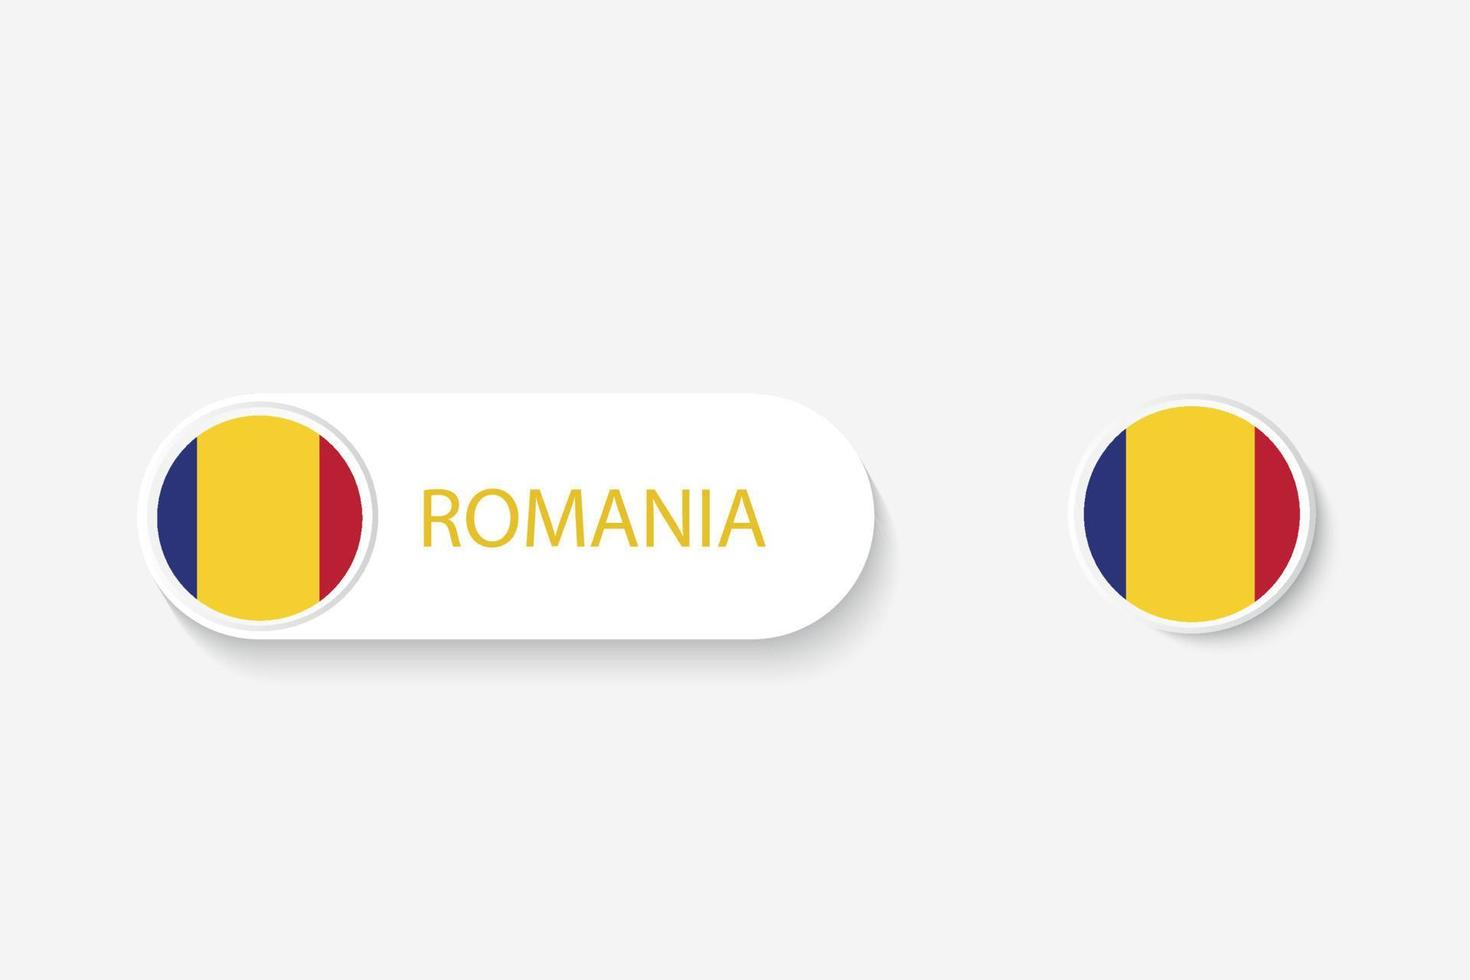 Romania button flag in illustration of oval shaped with word of Romania. And button flag Romania. vector